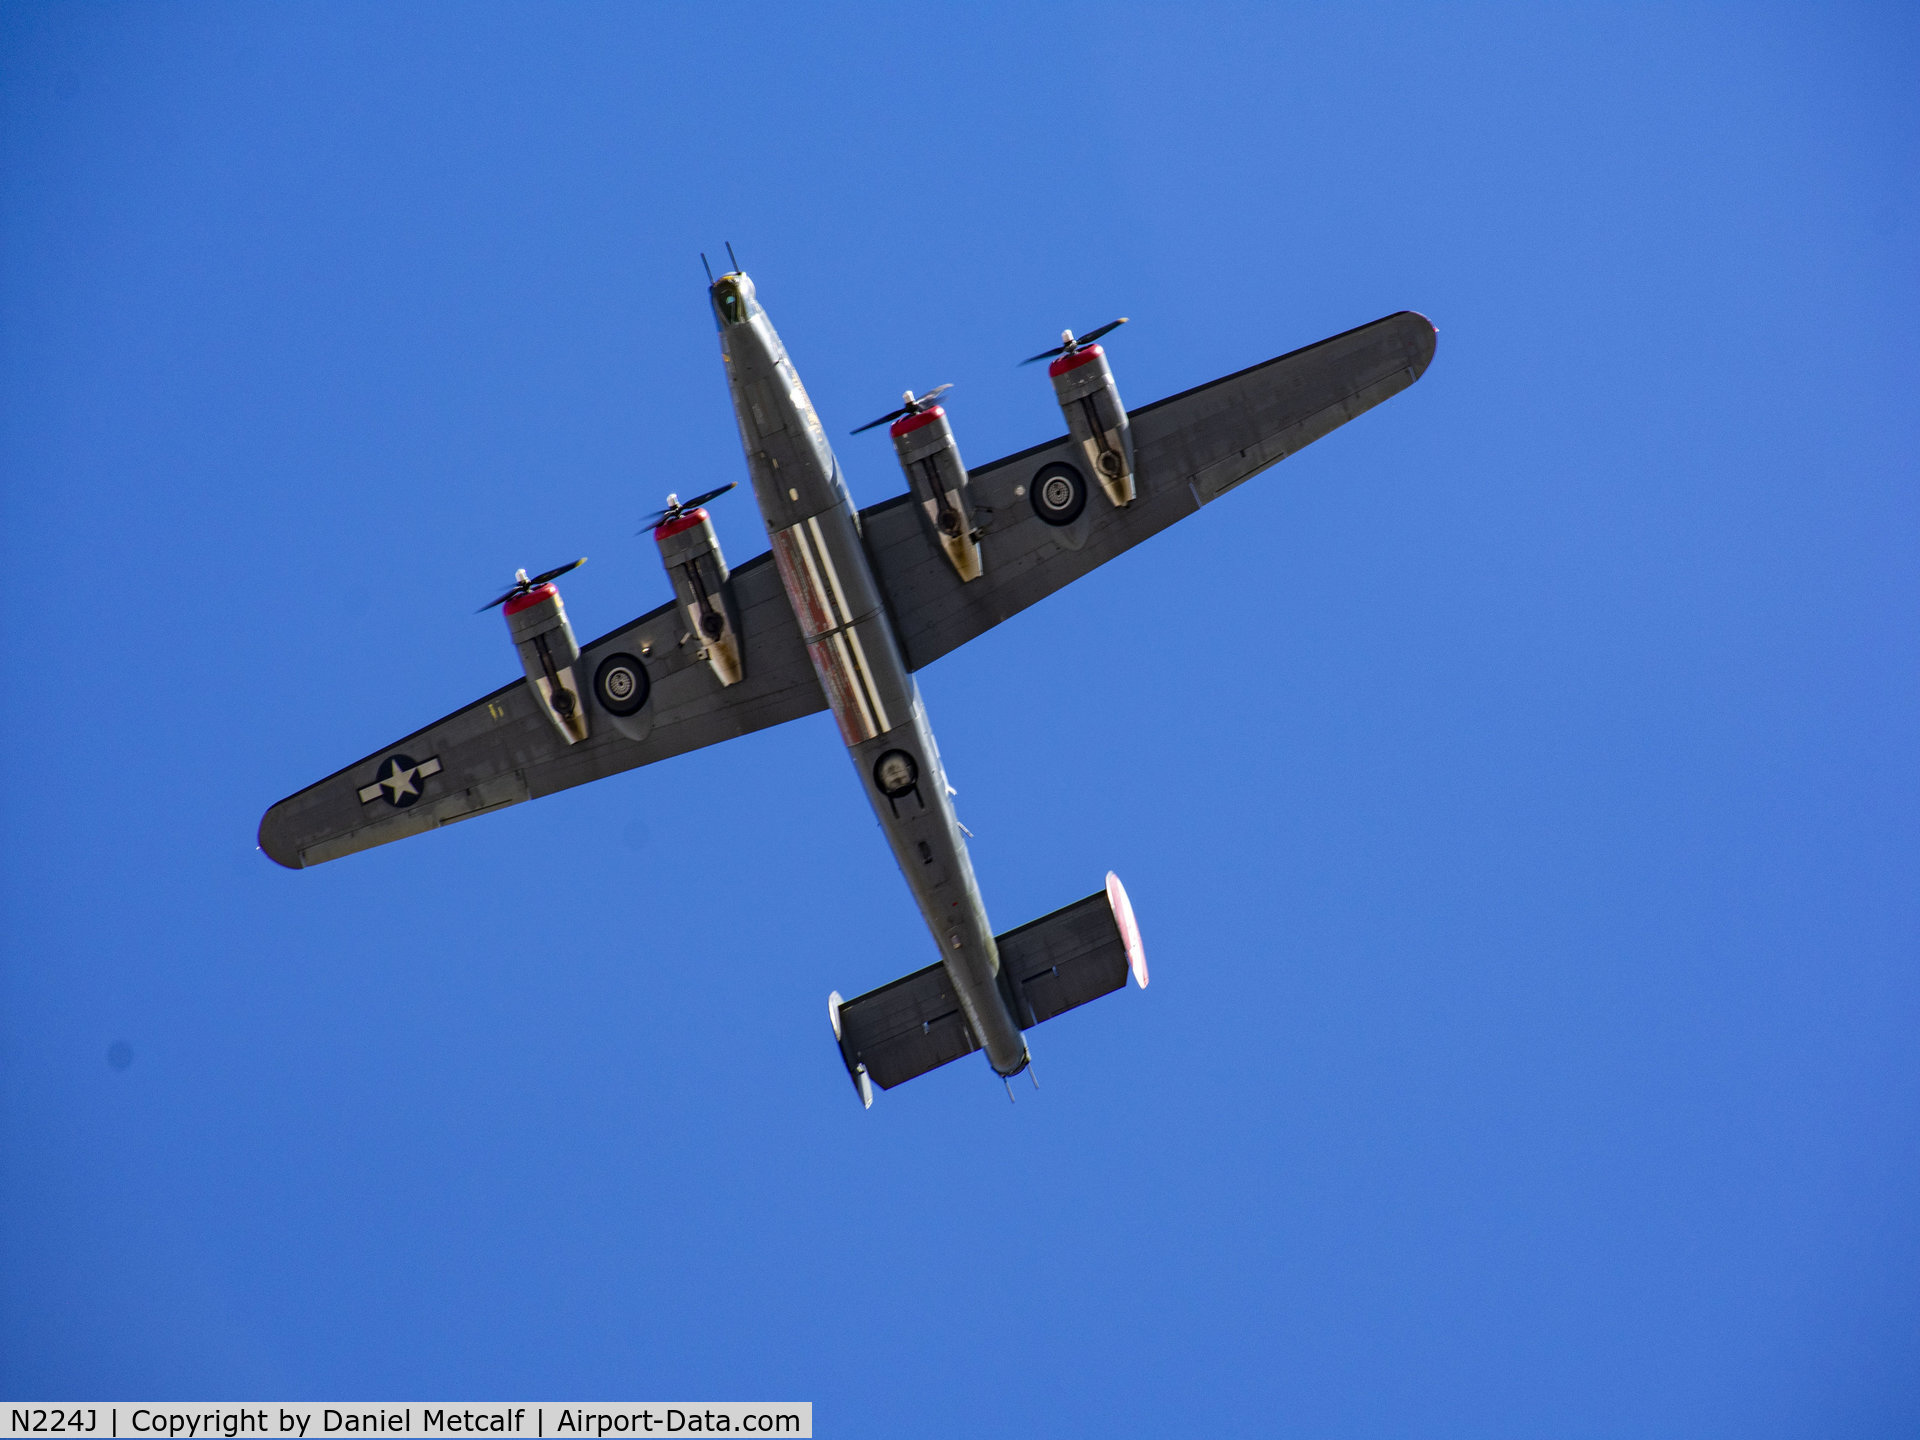 N224J, 1944 Consolidated B-24J-85-CF Liberator C/N 1347 (44-44052), The Collings Foundation B-24 flying over Phoenix Deer Valley Airport